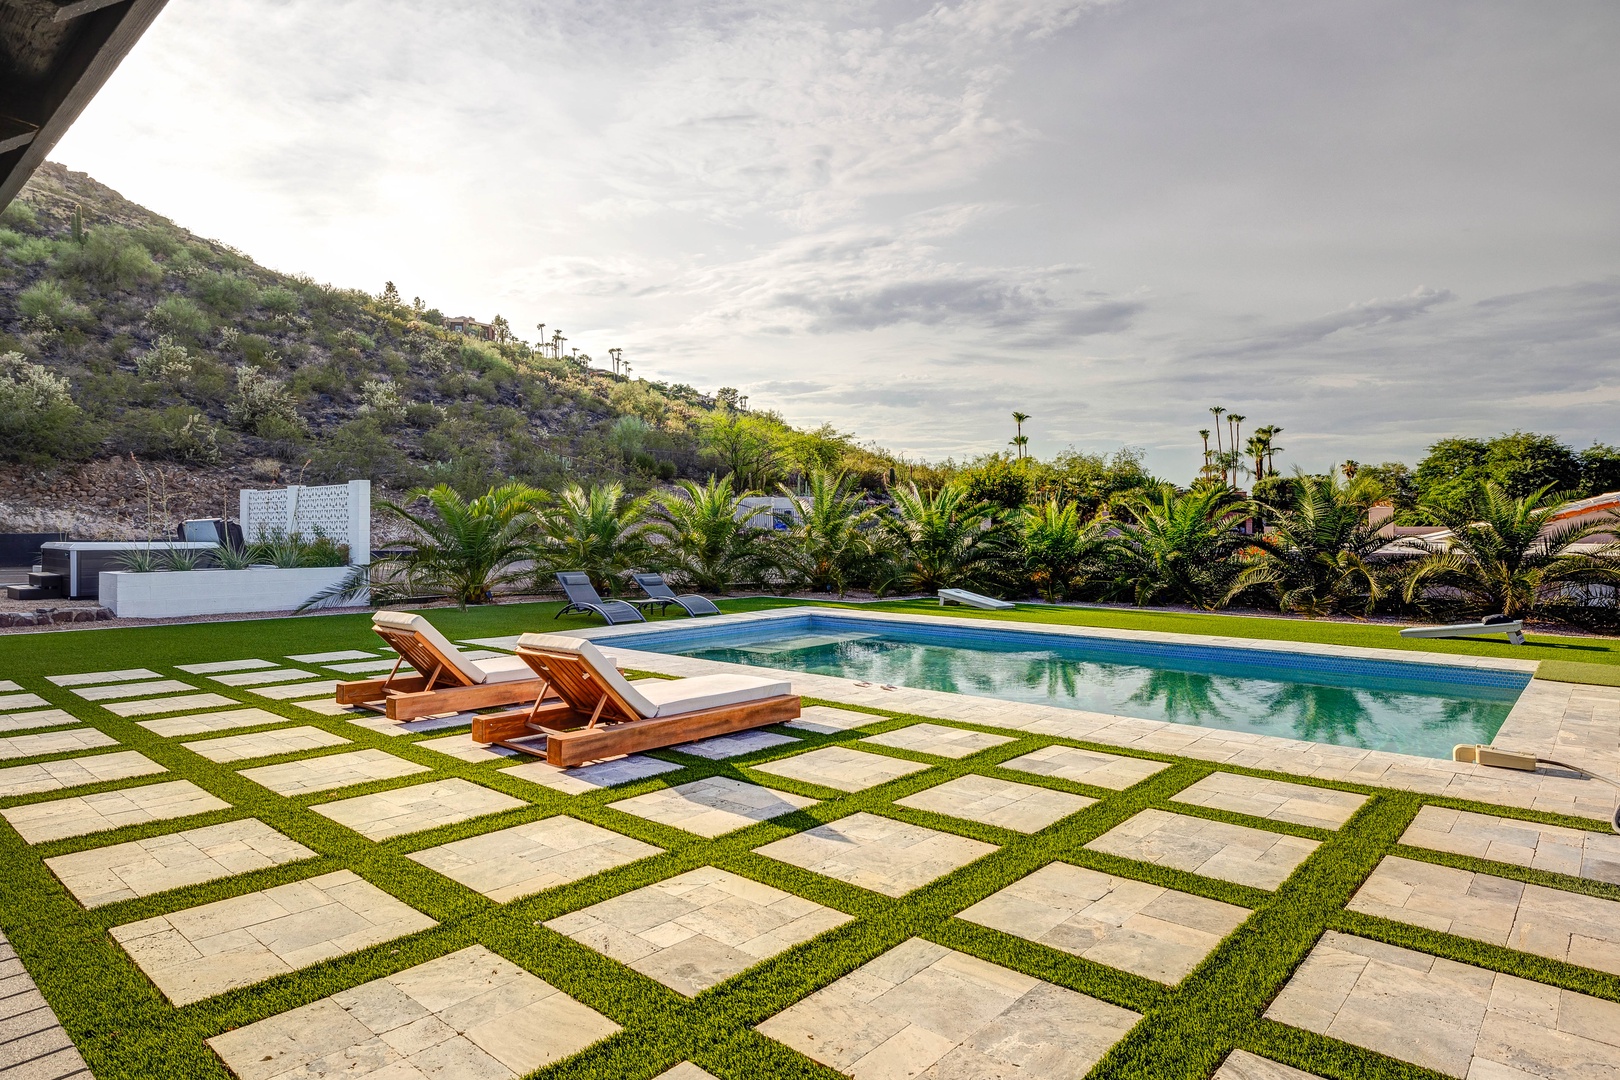 Poolside lounging happens here.